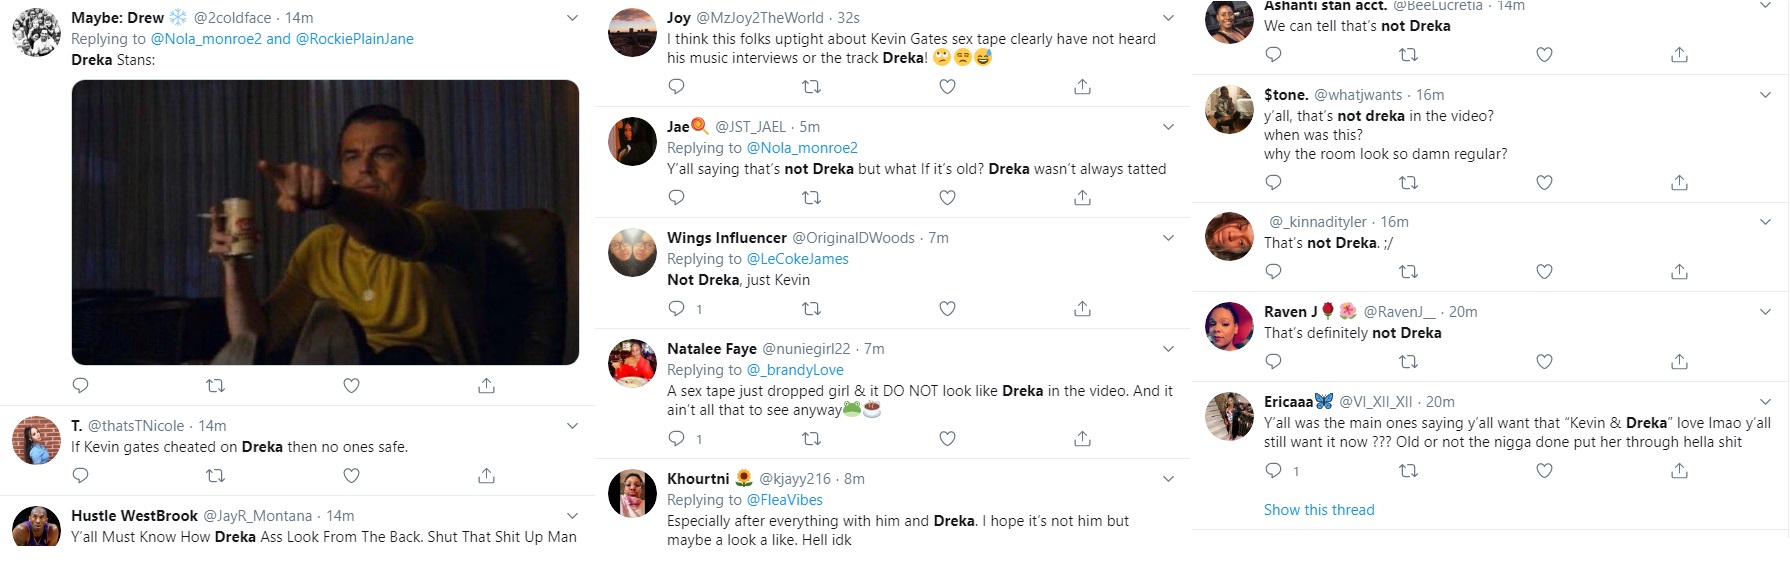 Dreka Gates begins trending on Twitter, after her husband, rapper Kevin Gates, has a sextape that went viral. Many of the fans, posting on Twitter, believe that Dreka is not the woman in the video with Kevin Gates, accusing him of cheating on his wife.